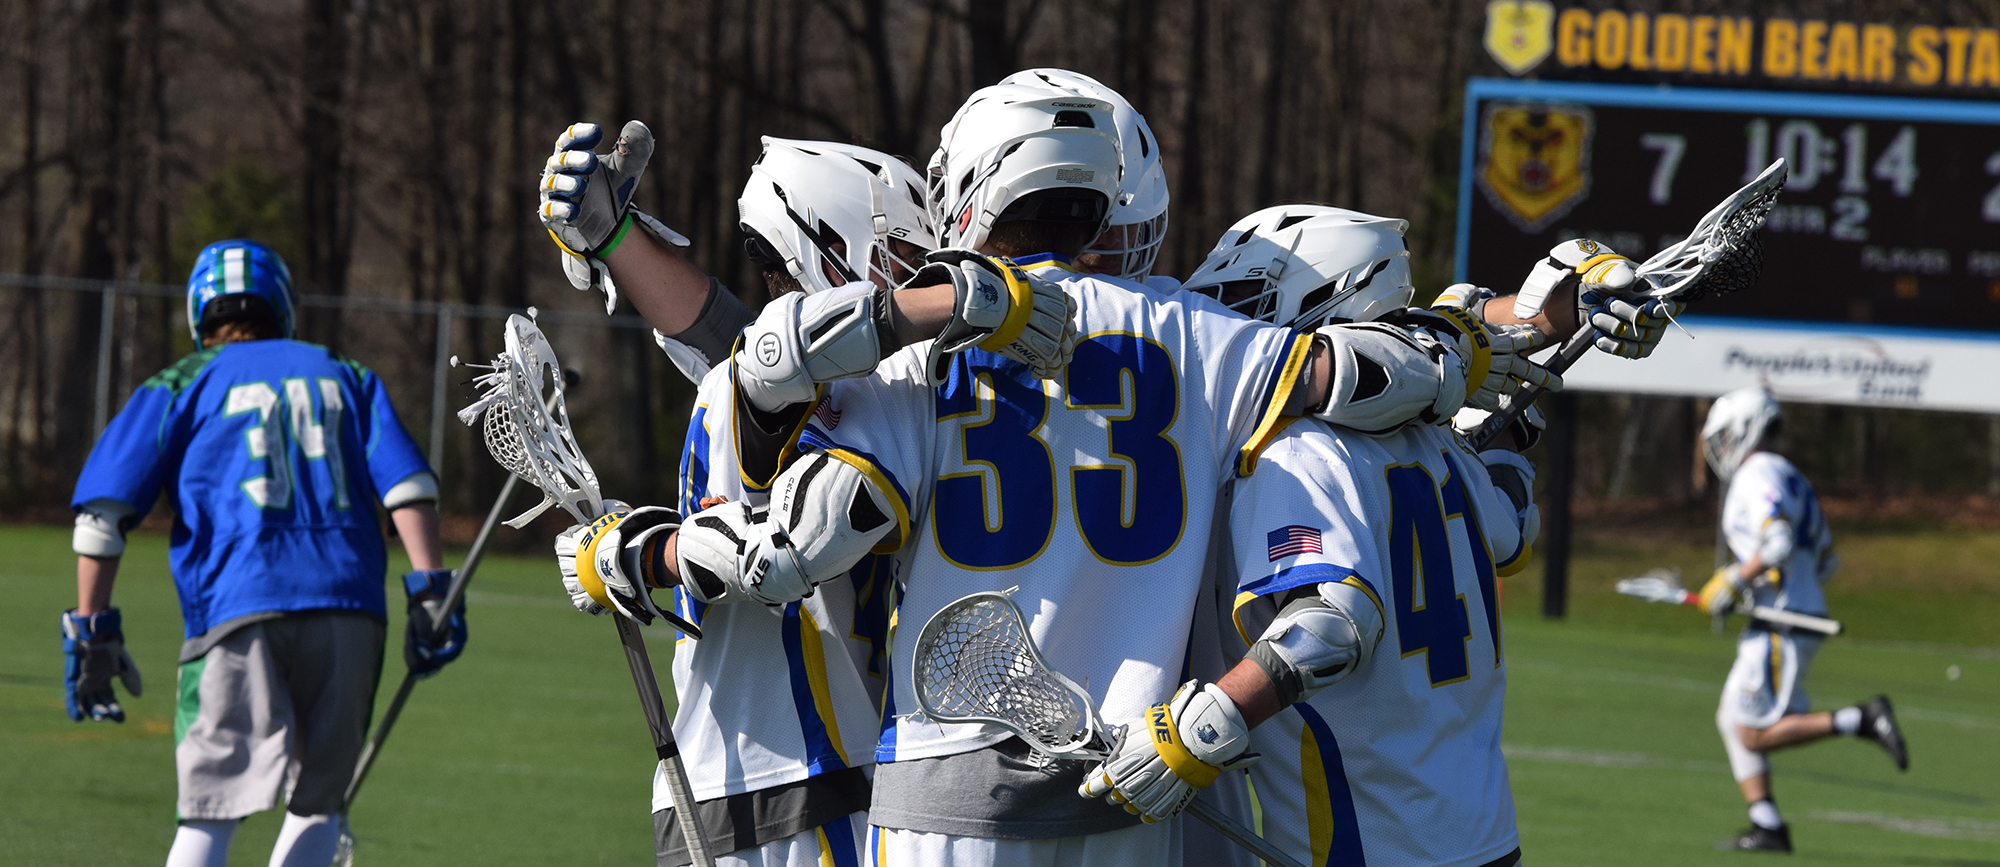 Western New England clinched its eighth straight trip to the CCC title game with an 18-5 win over Salve Regina in the semifinals on Tuesday at Golden Bear Stadium. (Photo by Rachael Margossian)